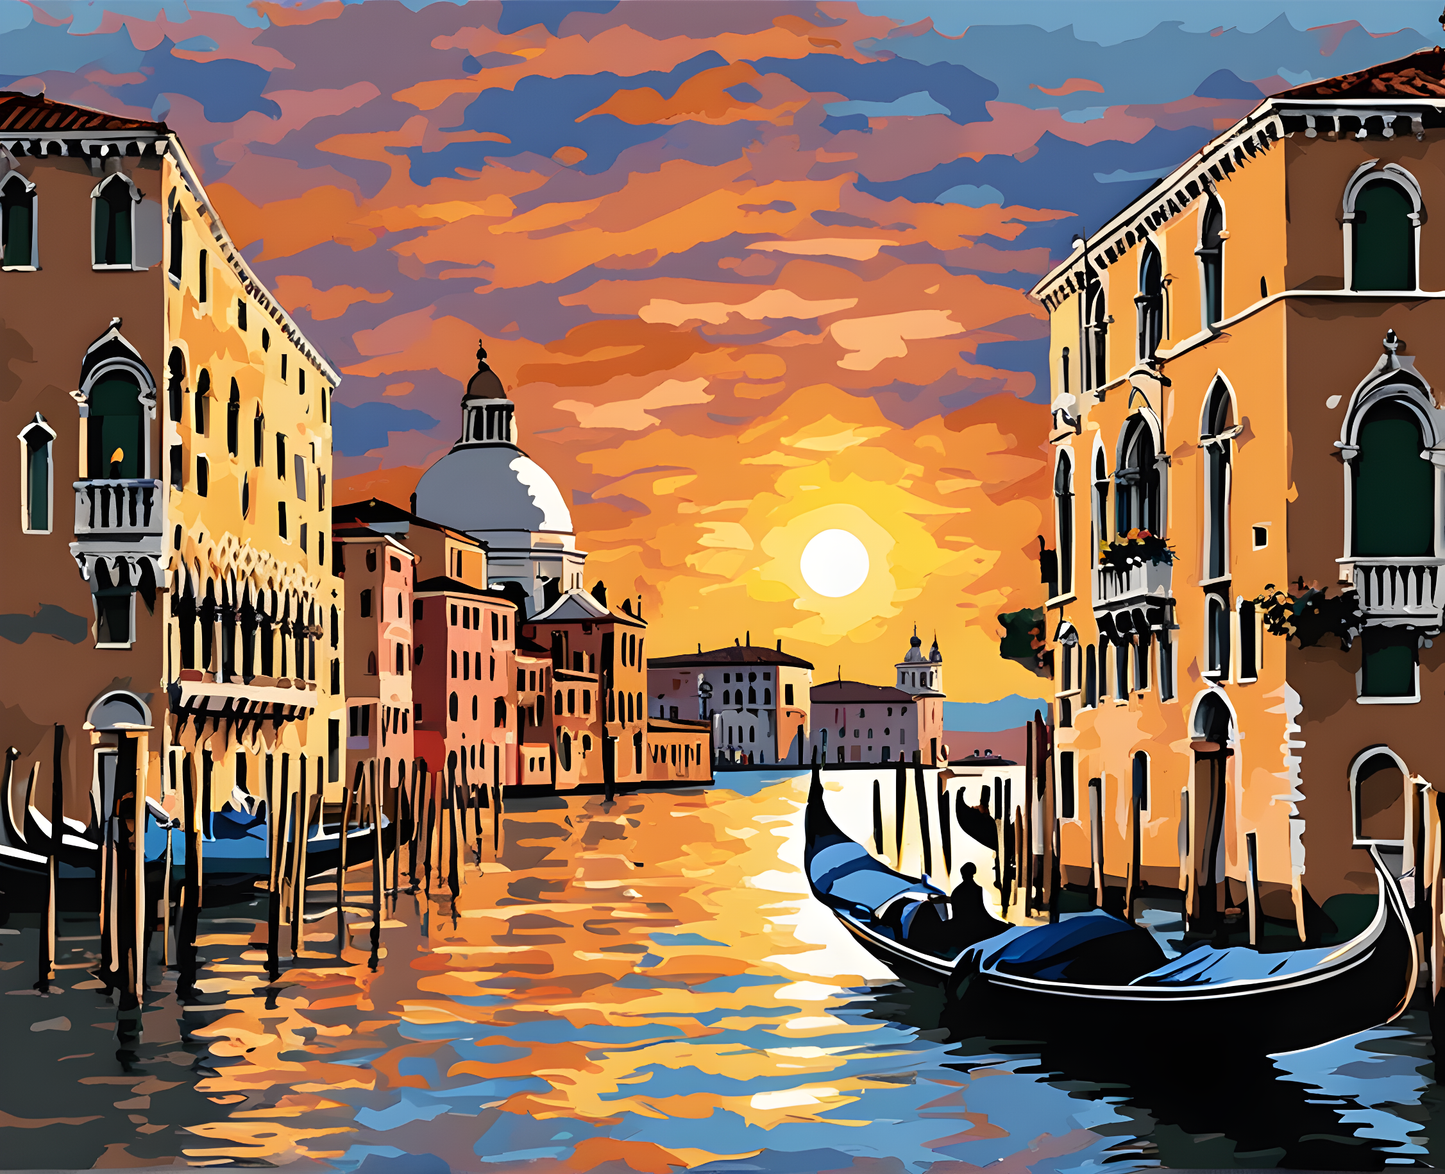 Sunset Collection OD (21) - Sunset in Venice, Italy - Van-Go Paint-By-Number Kit